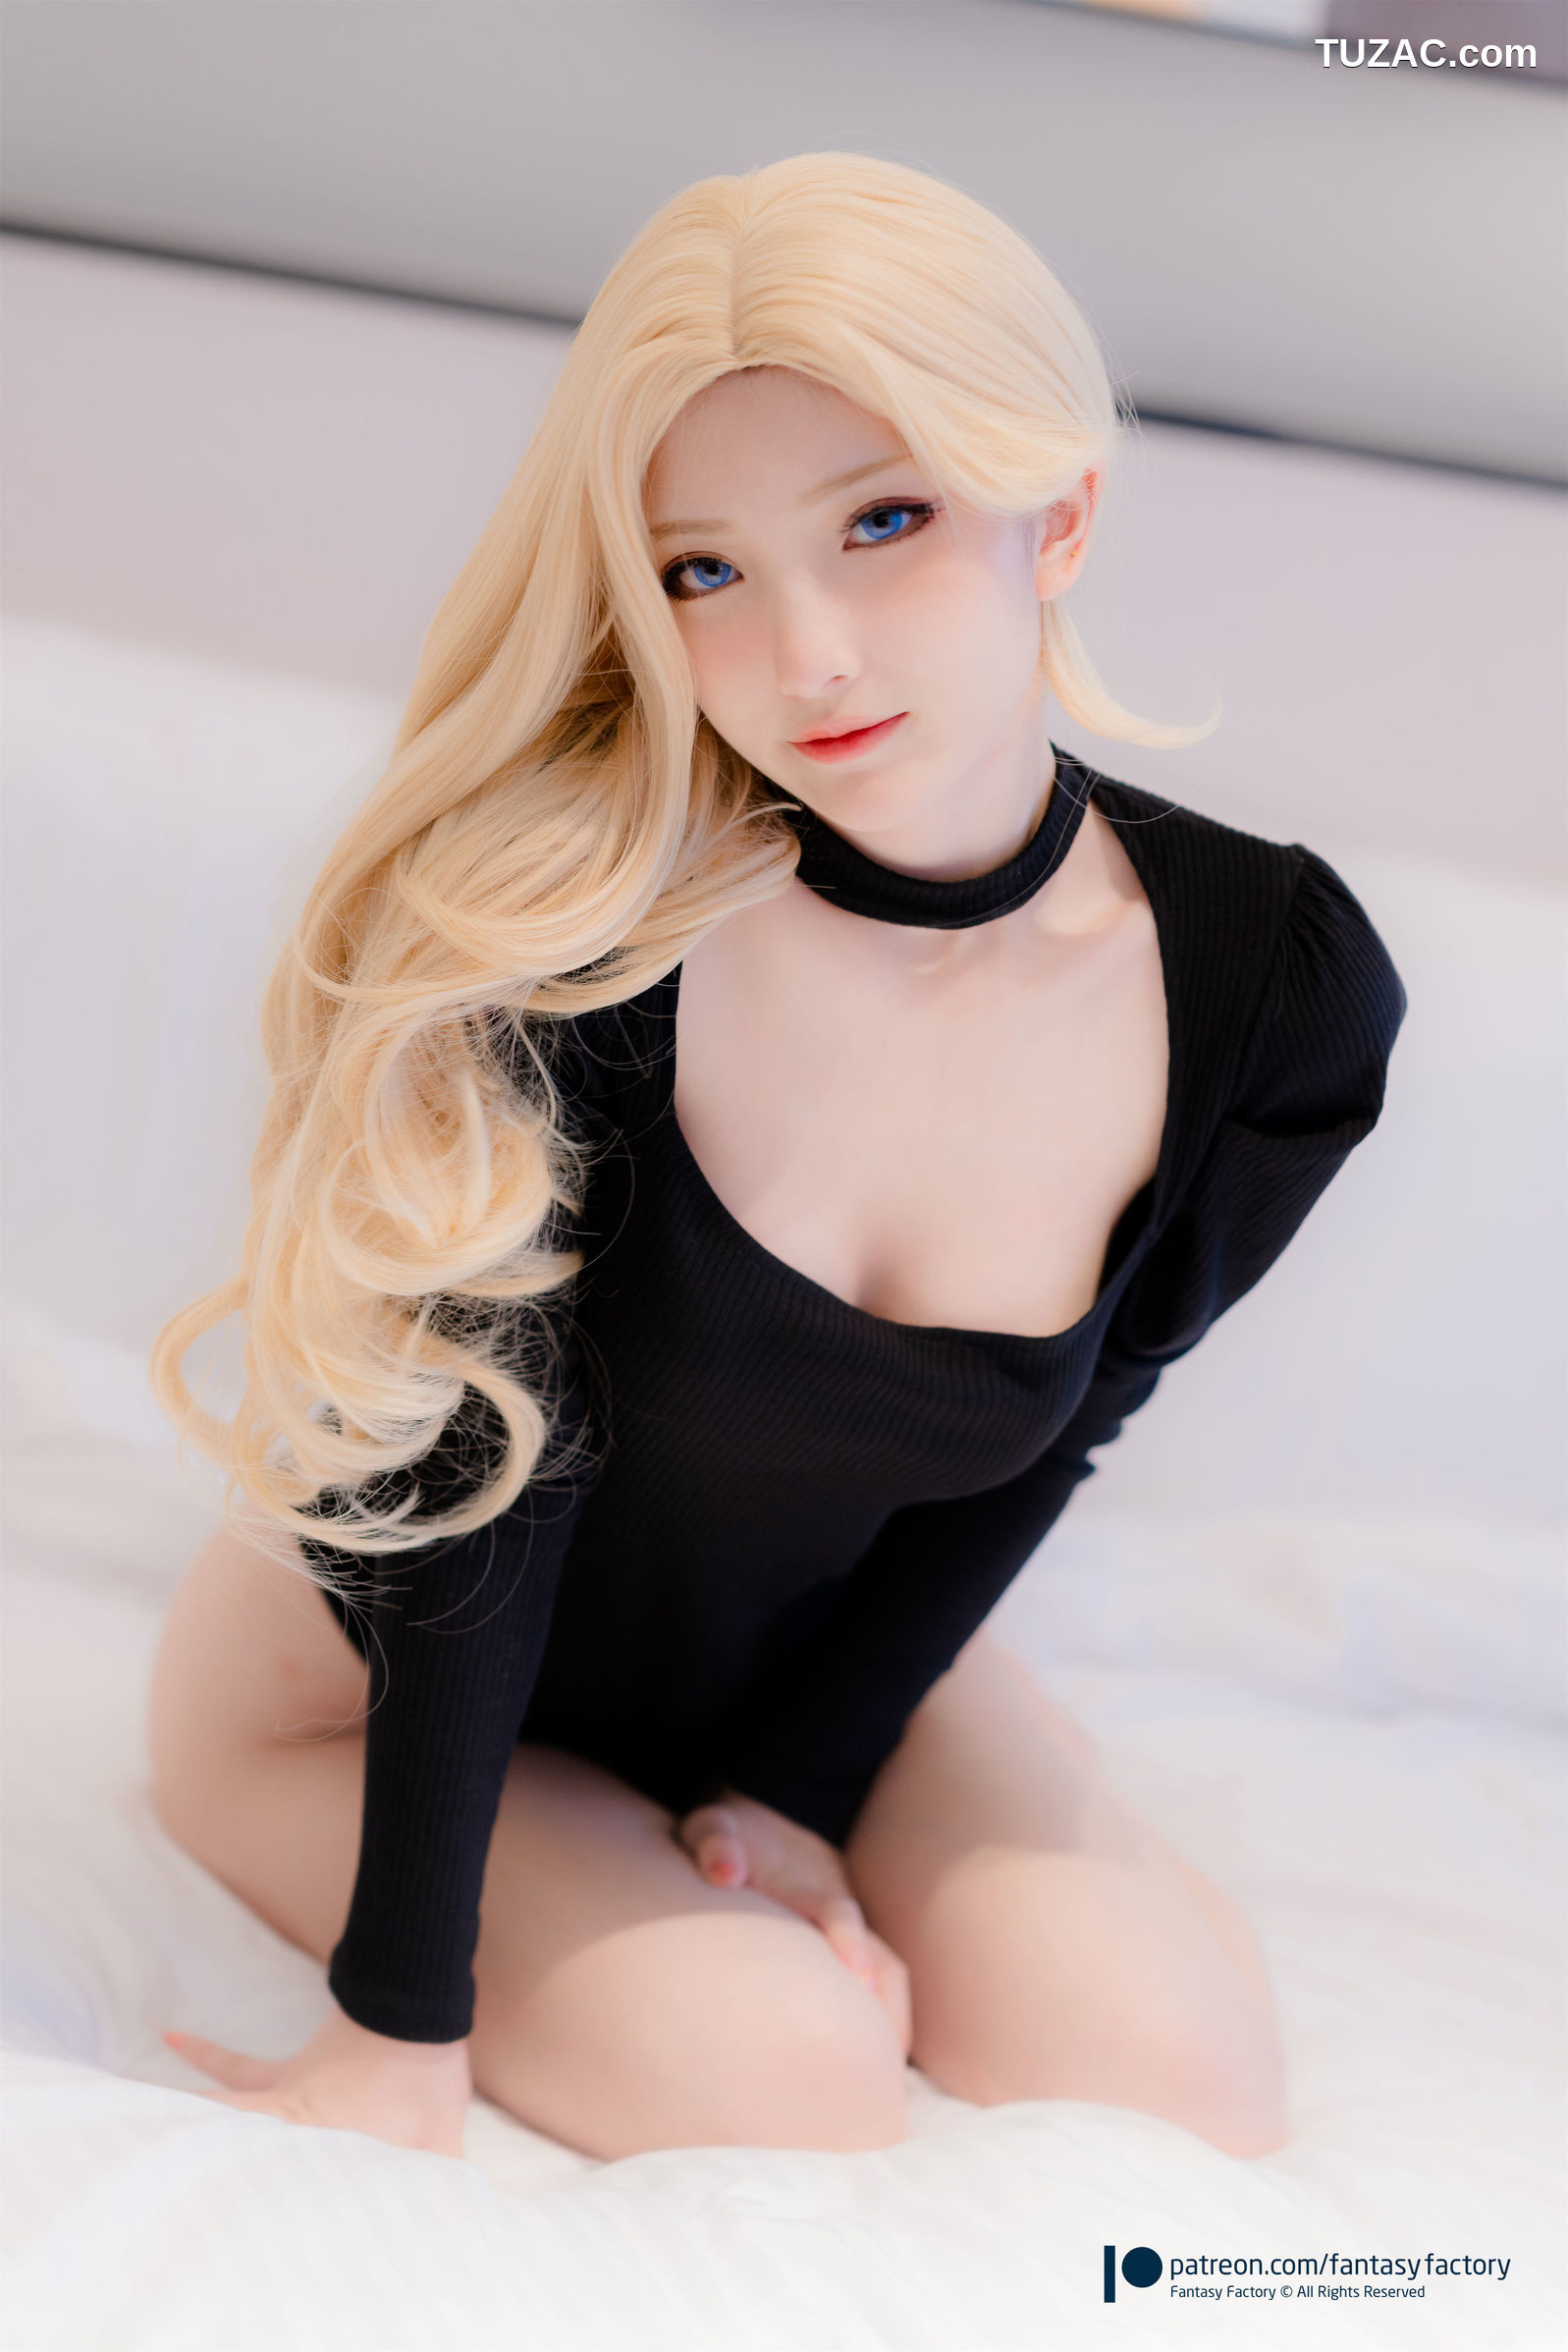 Fantasy-Factory-小丁Ding《Try-Blond-and-Sexy》-金发黑衣性感-2020.12